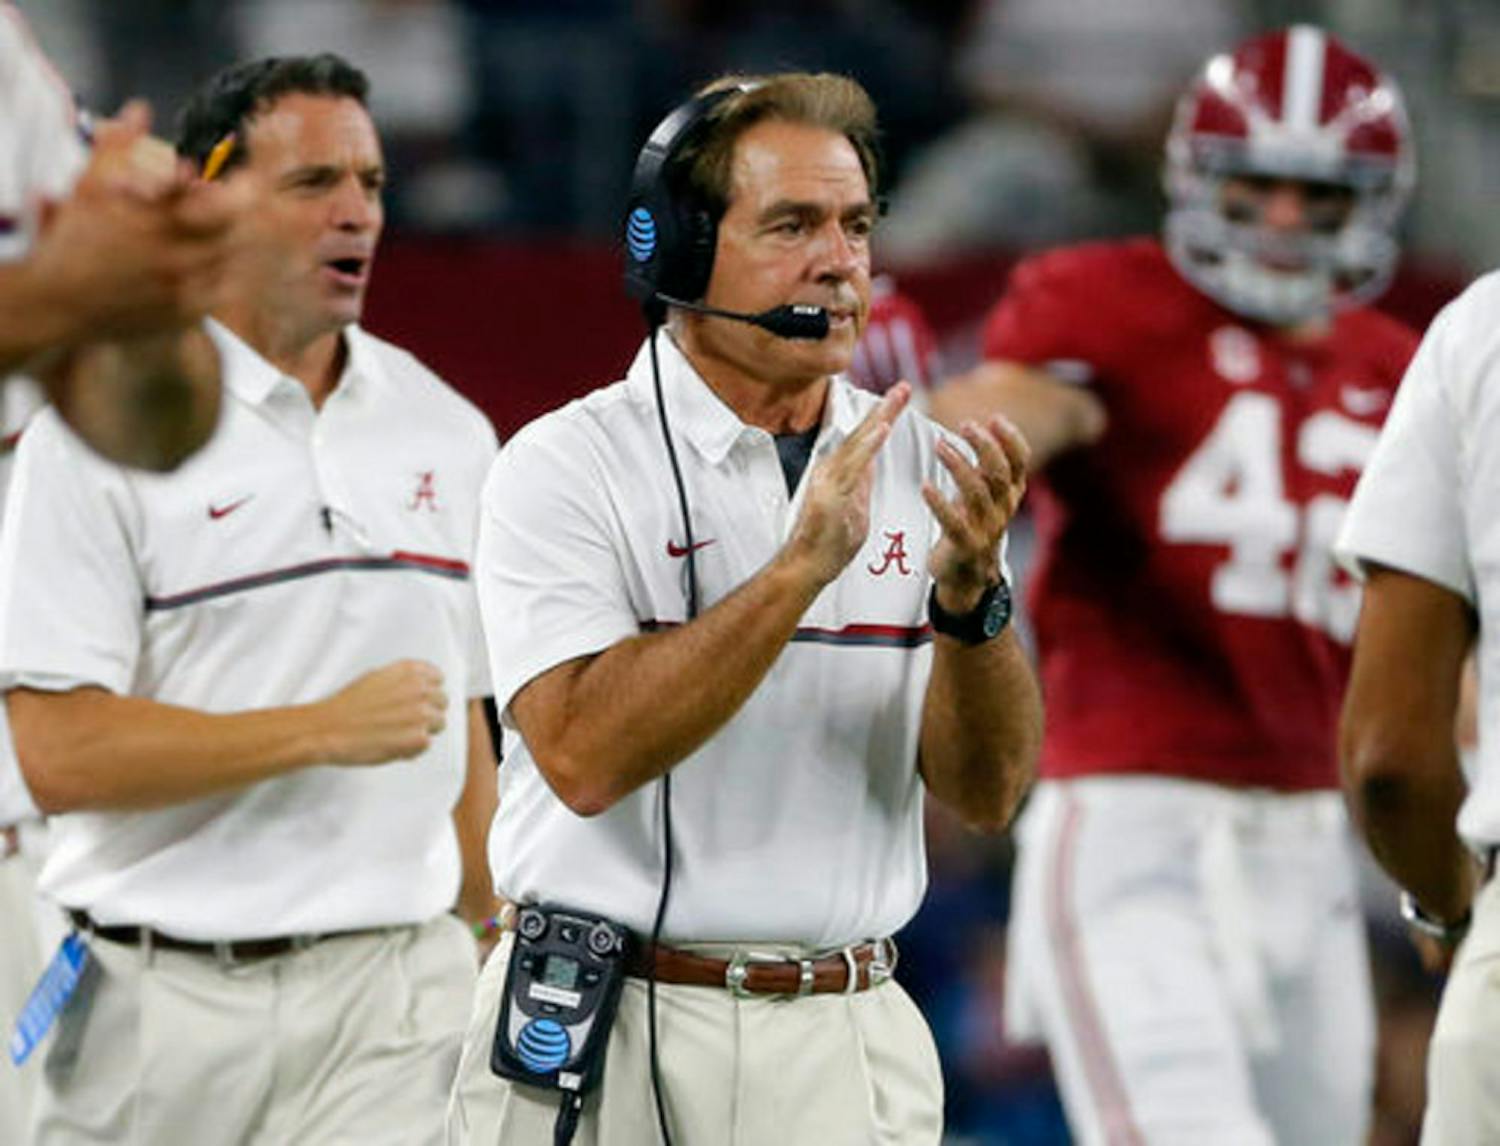 Alabama coach Nick Saban applauds on the sideline during the first half of an NCAA college football game against Southern California on Saturday, Sept. 3, 2016, in Arlington, Texas. (AP Photo/Tony Gutierrez)